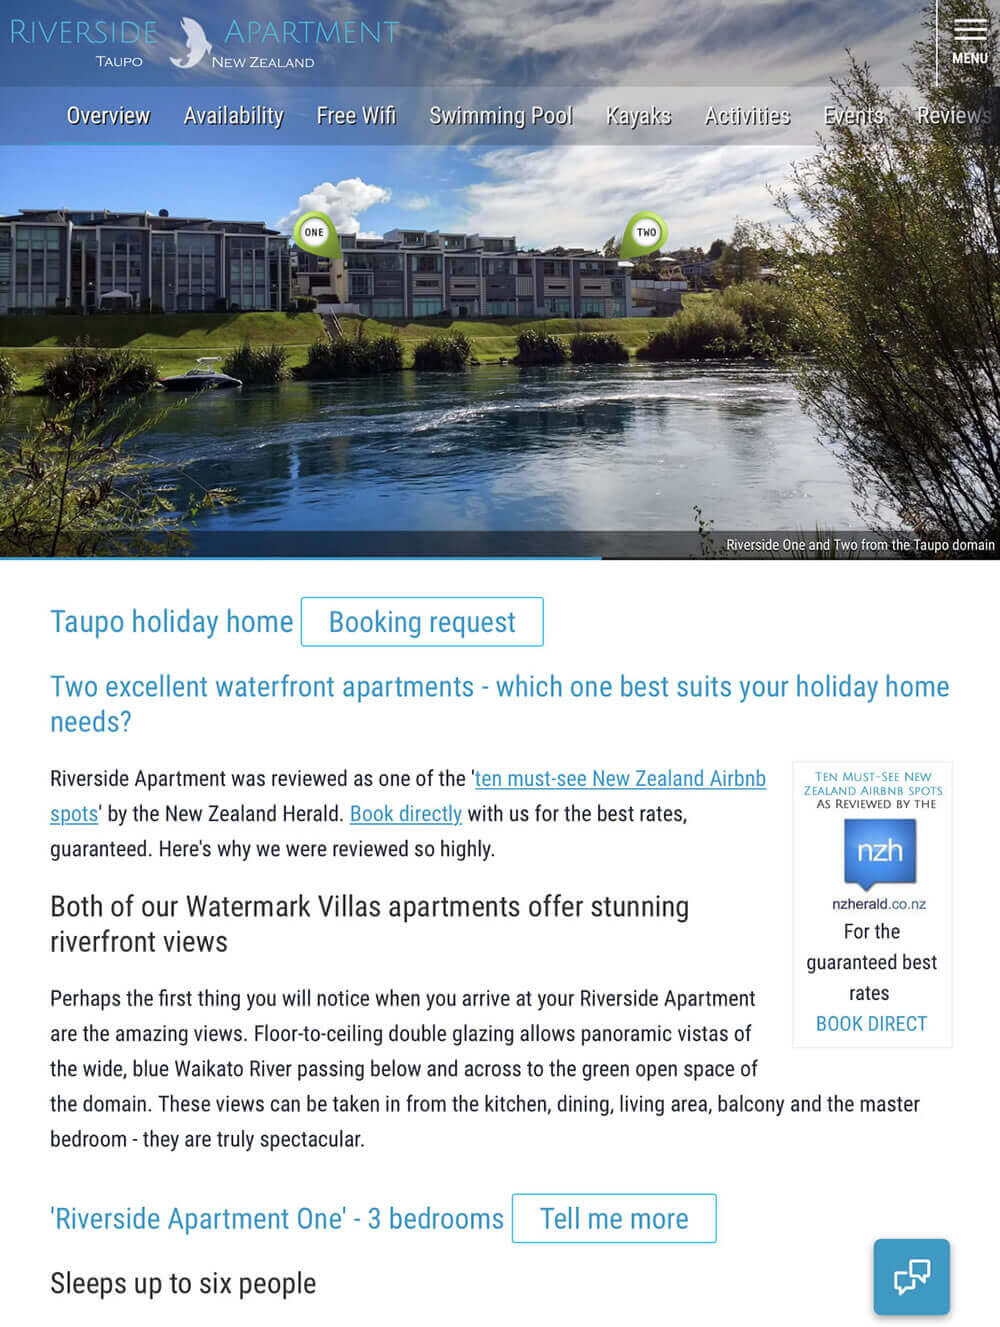 Riverside Apartment, Taupo Accommodation website by Piccante Web Design